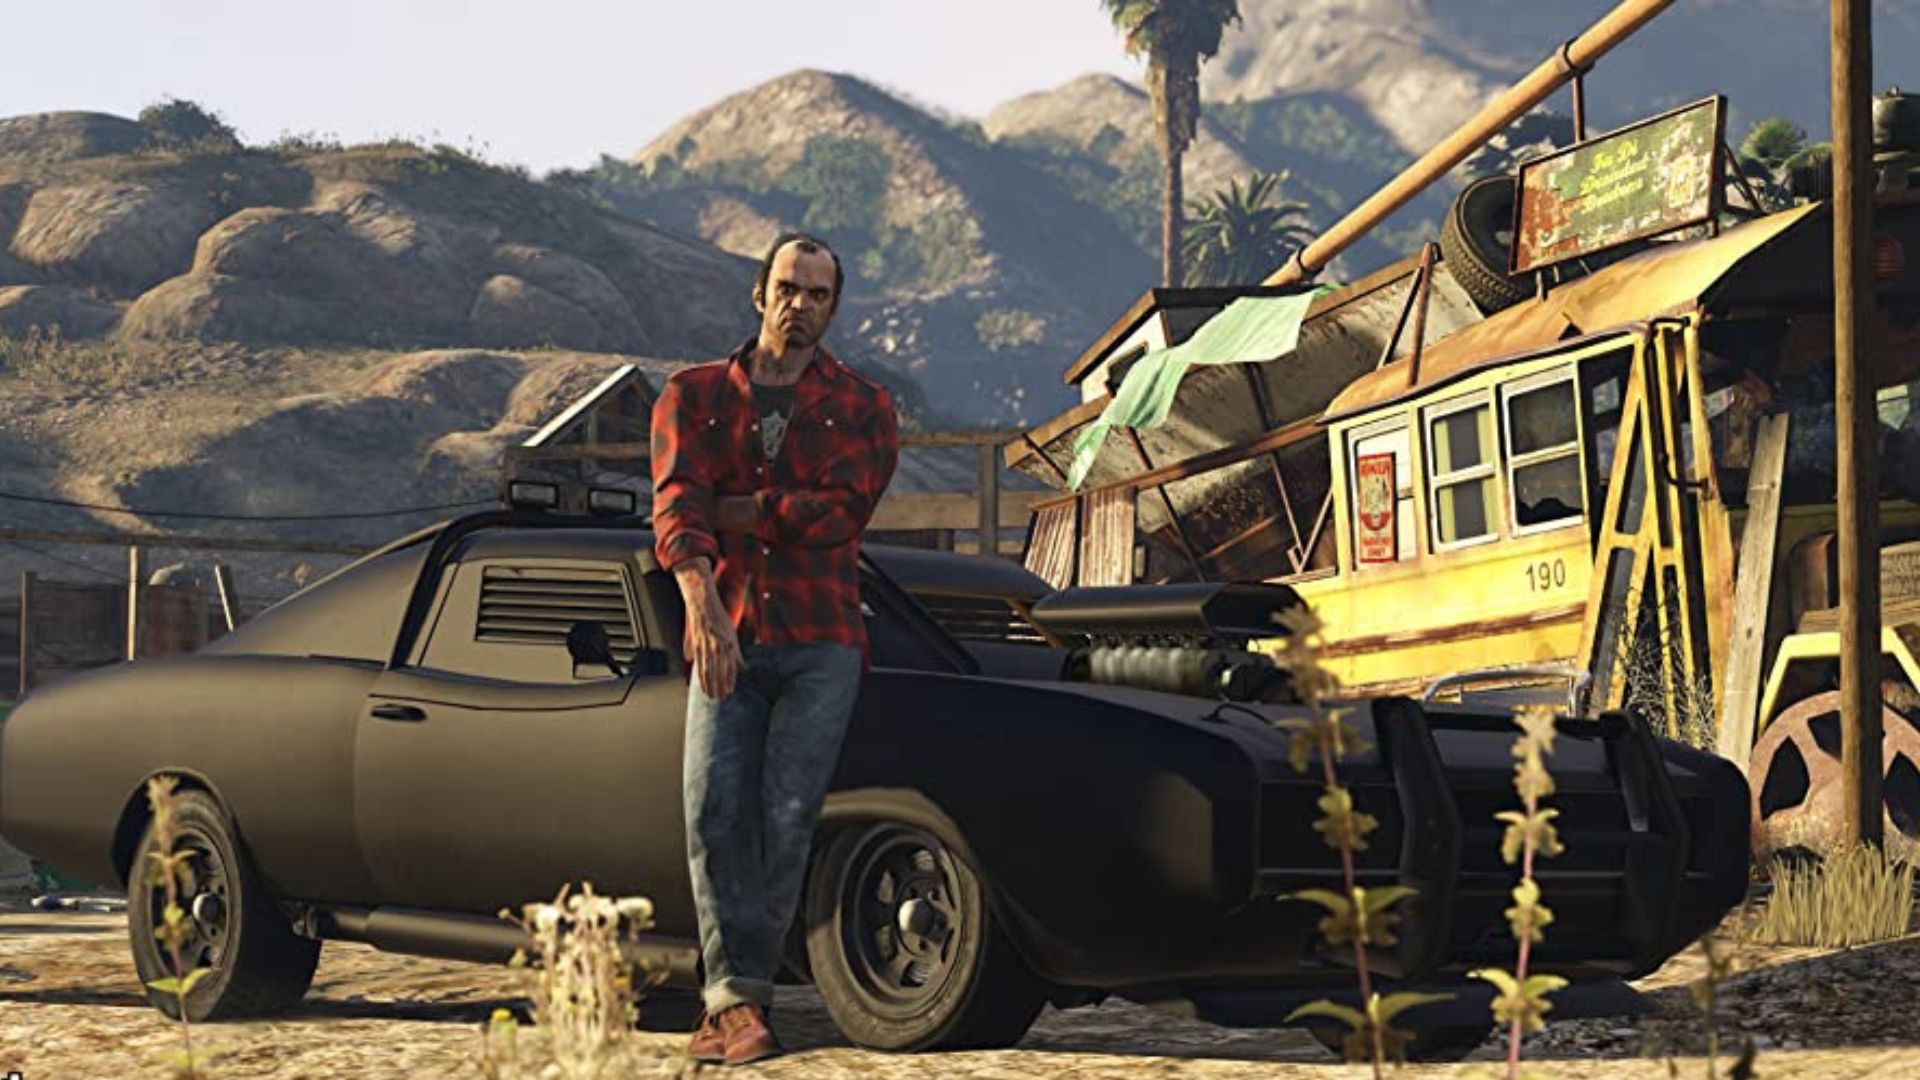 GTA 6 leak: PS5 Pro users could enjoy Grand Theft Auto 6 a year